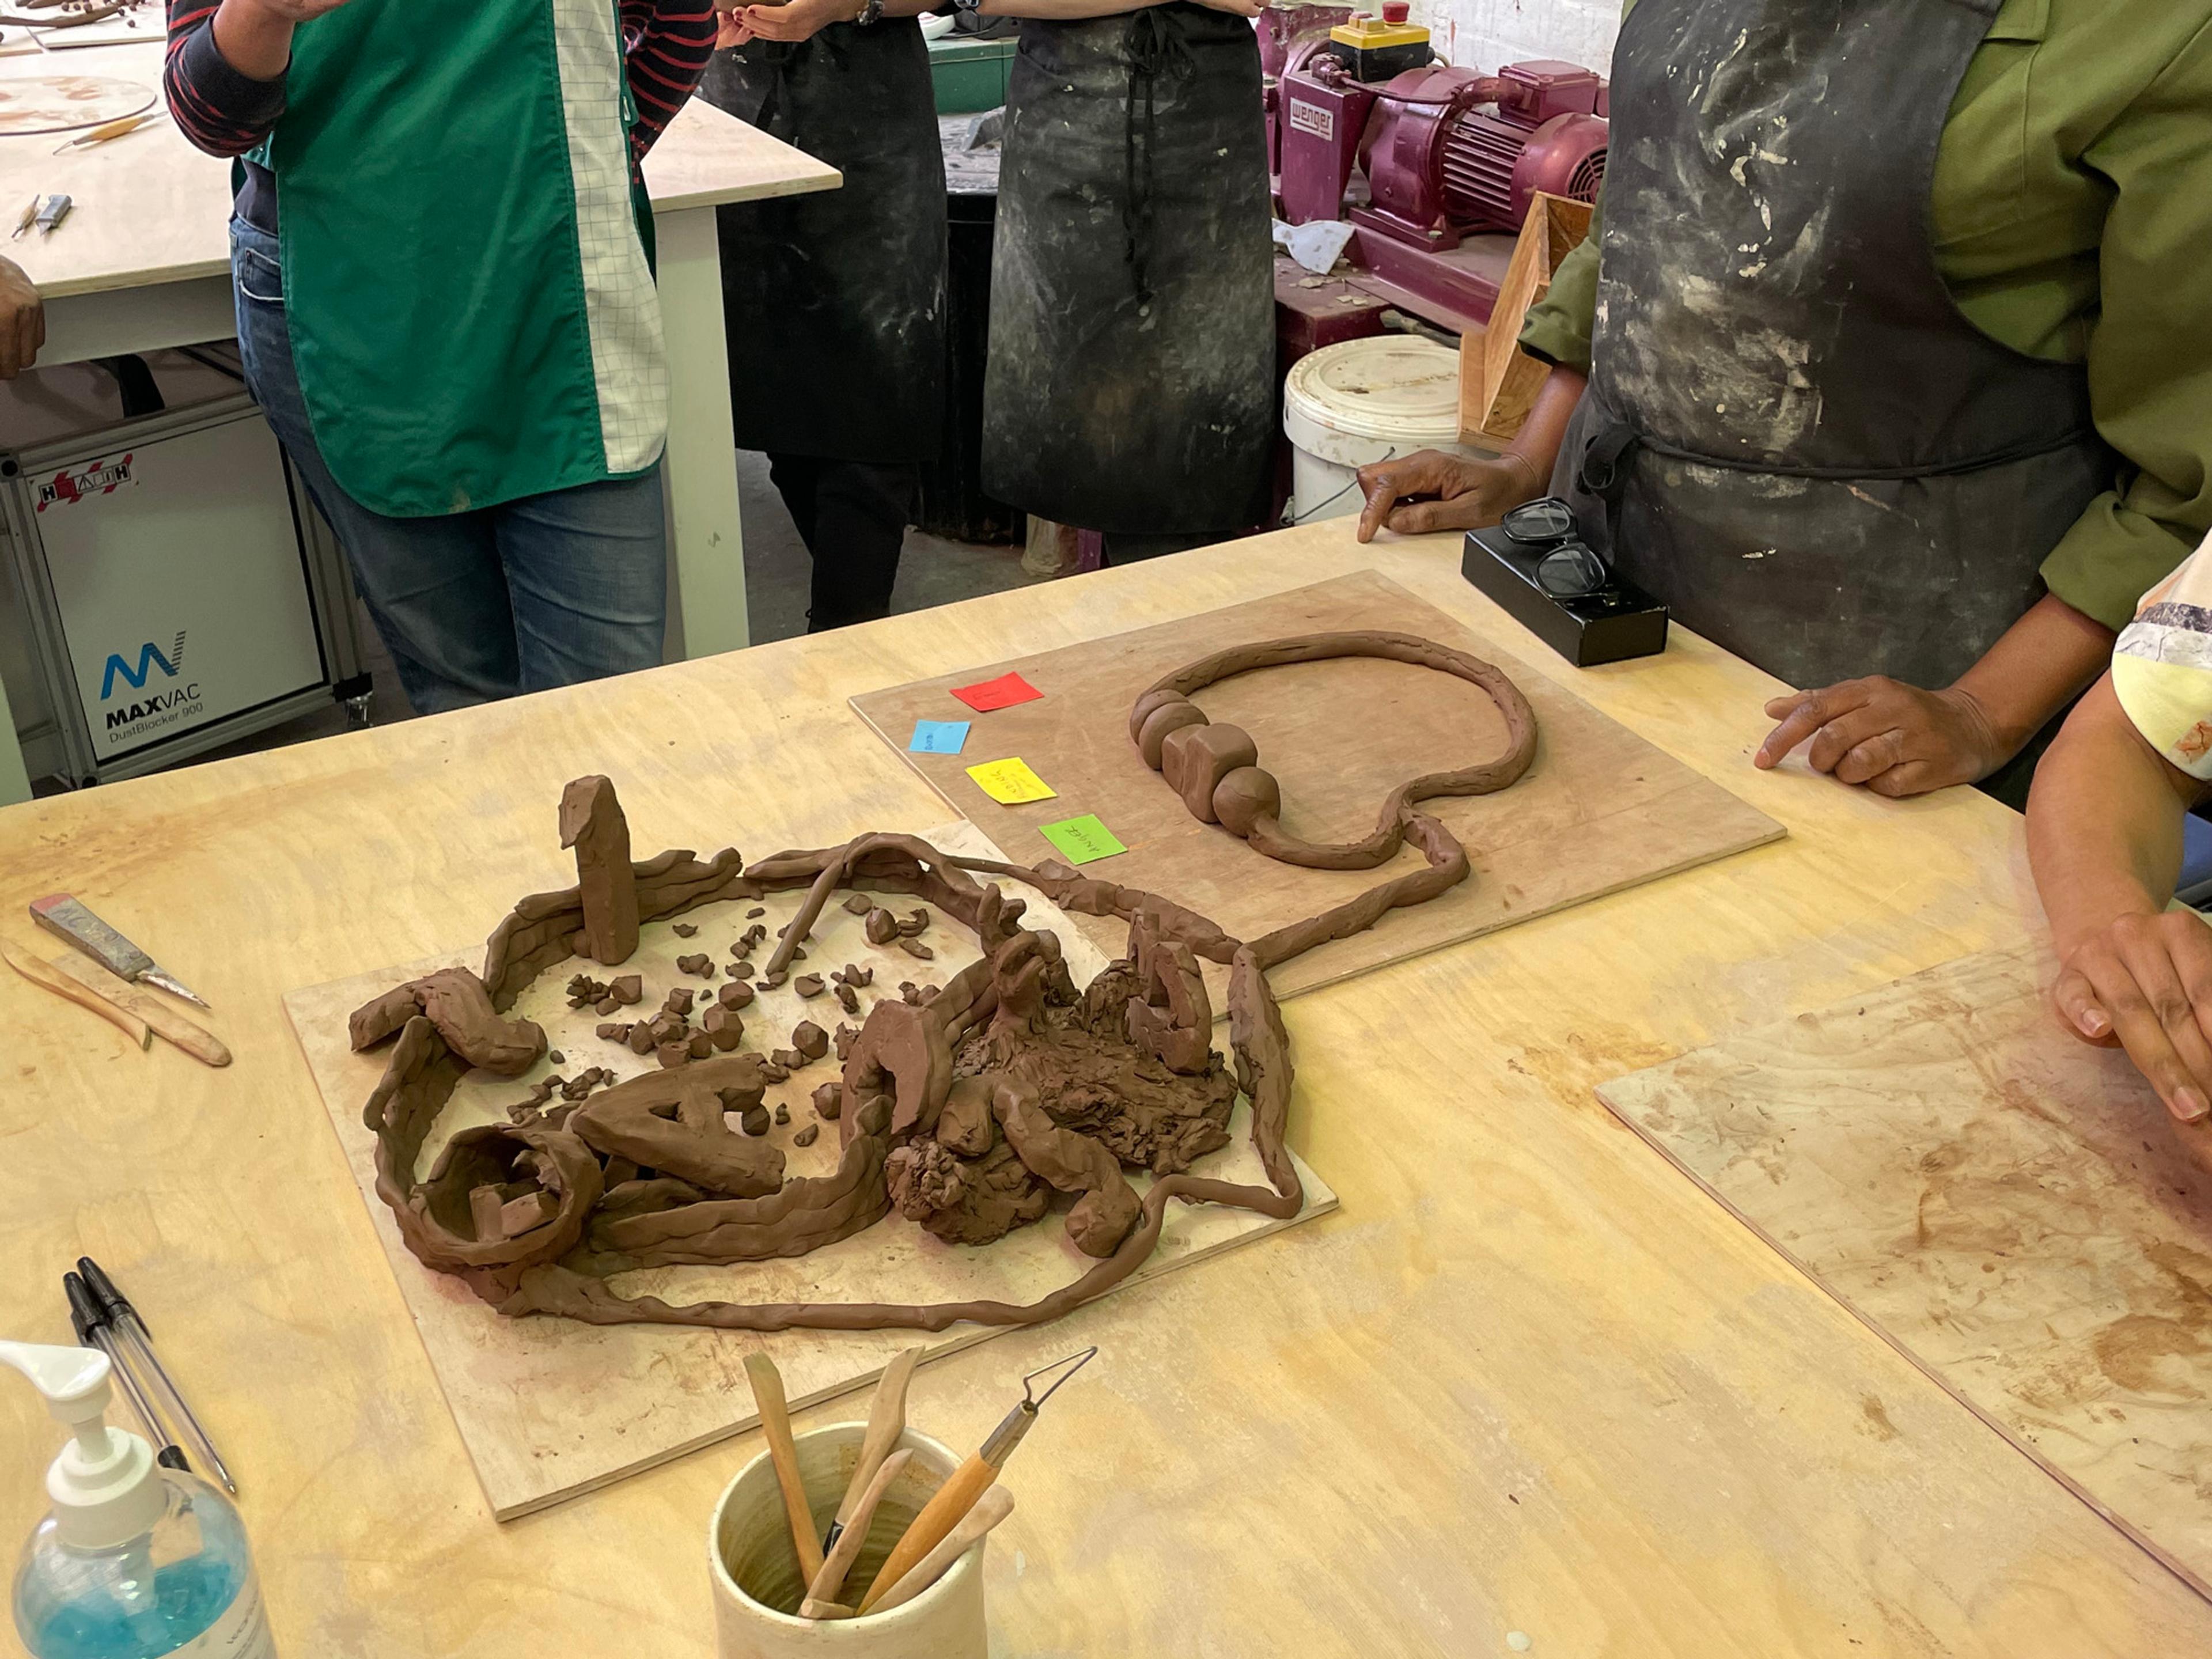 Five people, heads out of picture, stand around a table ooking at some pieces of clay formed into primitive shapes